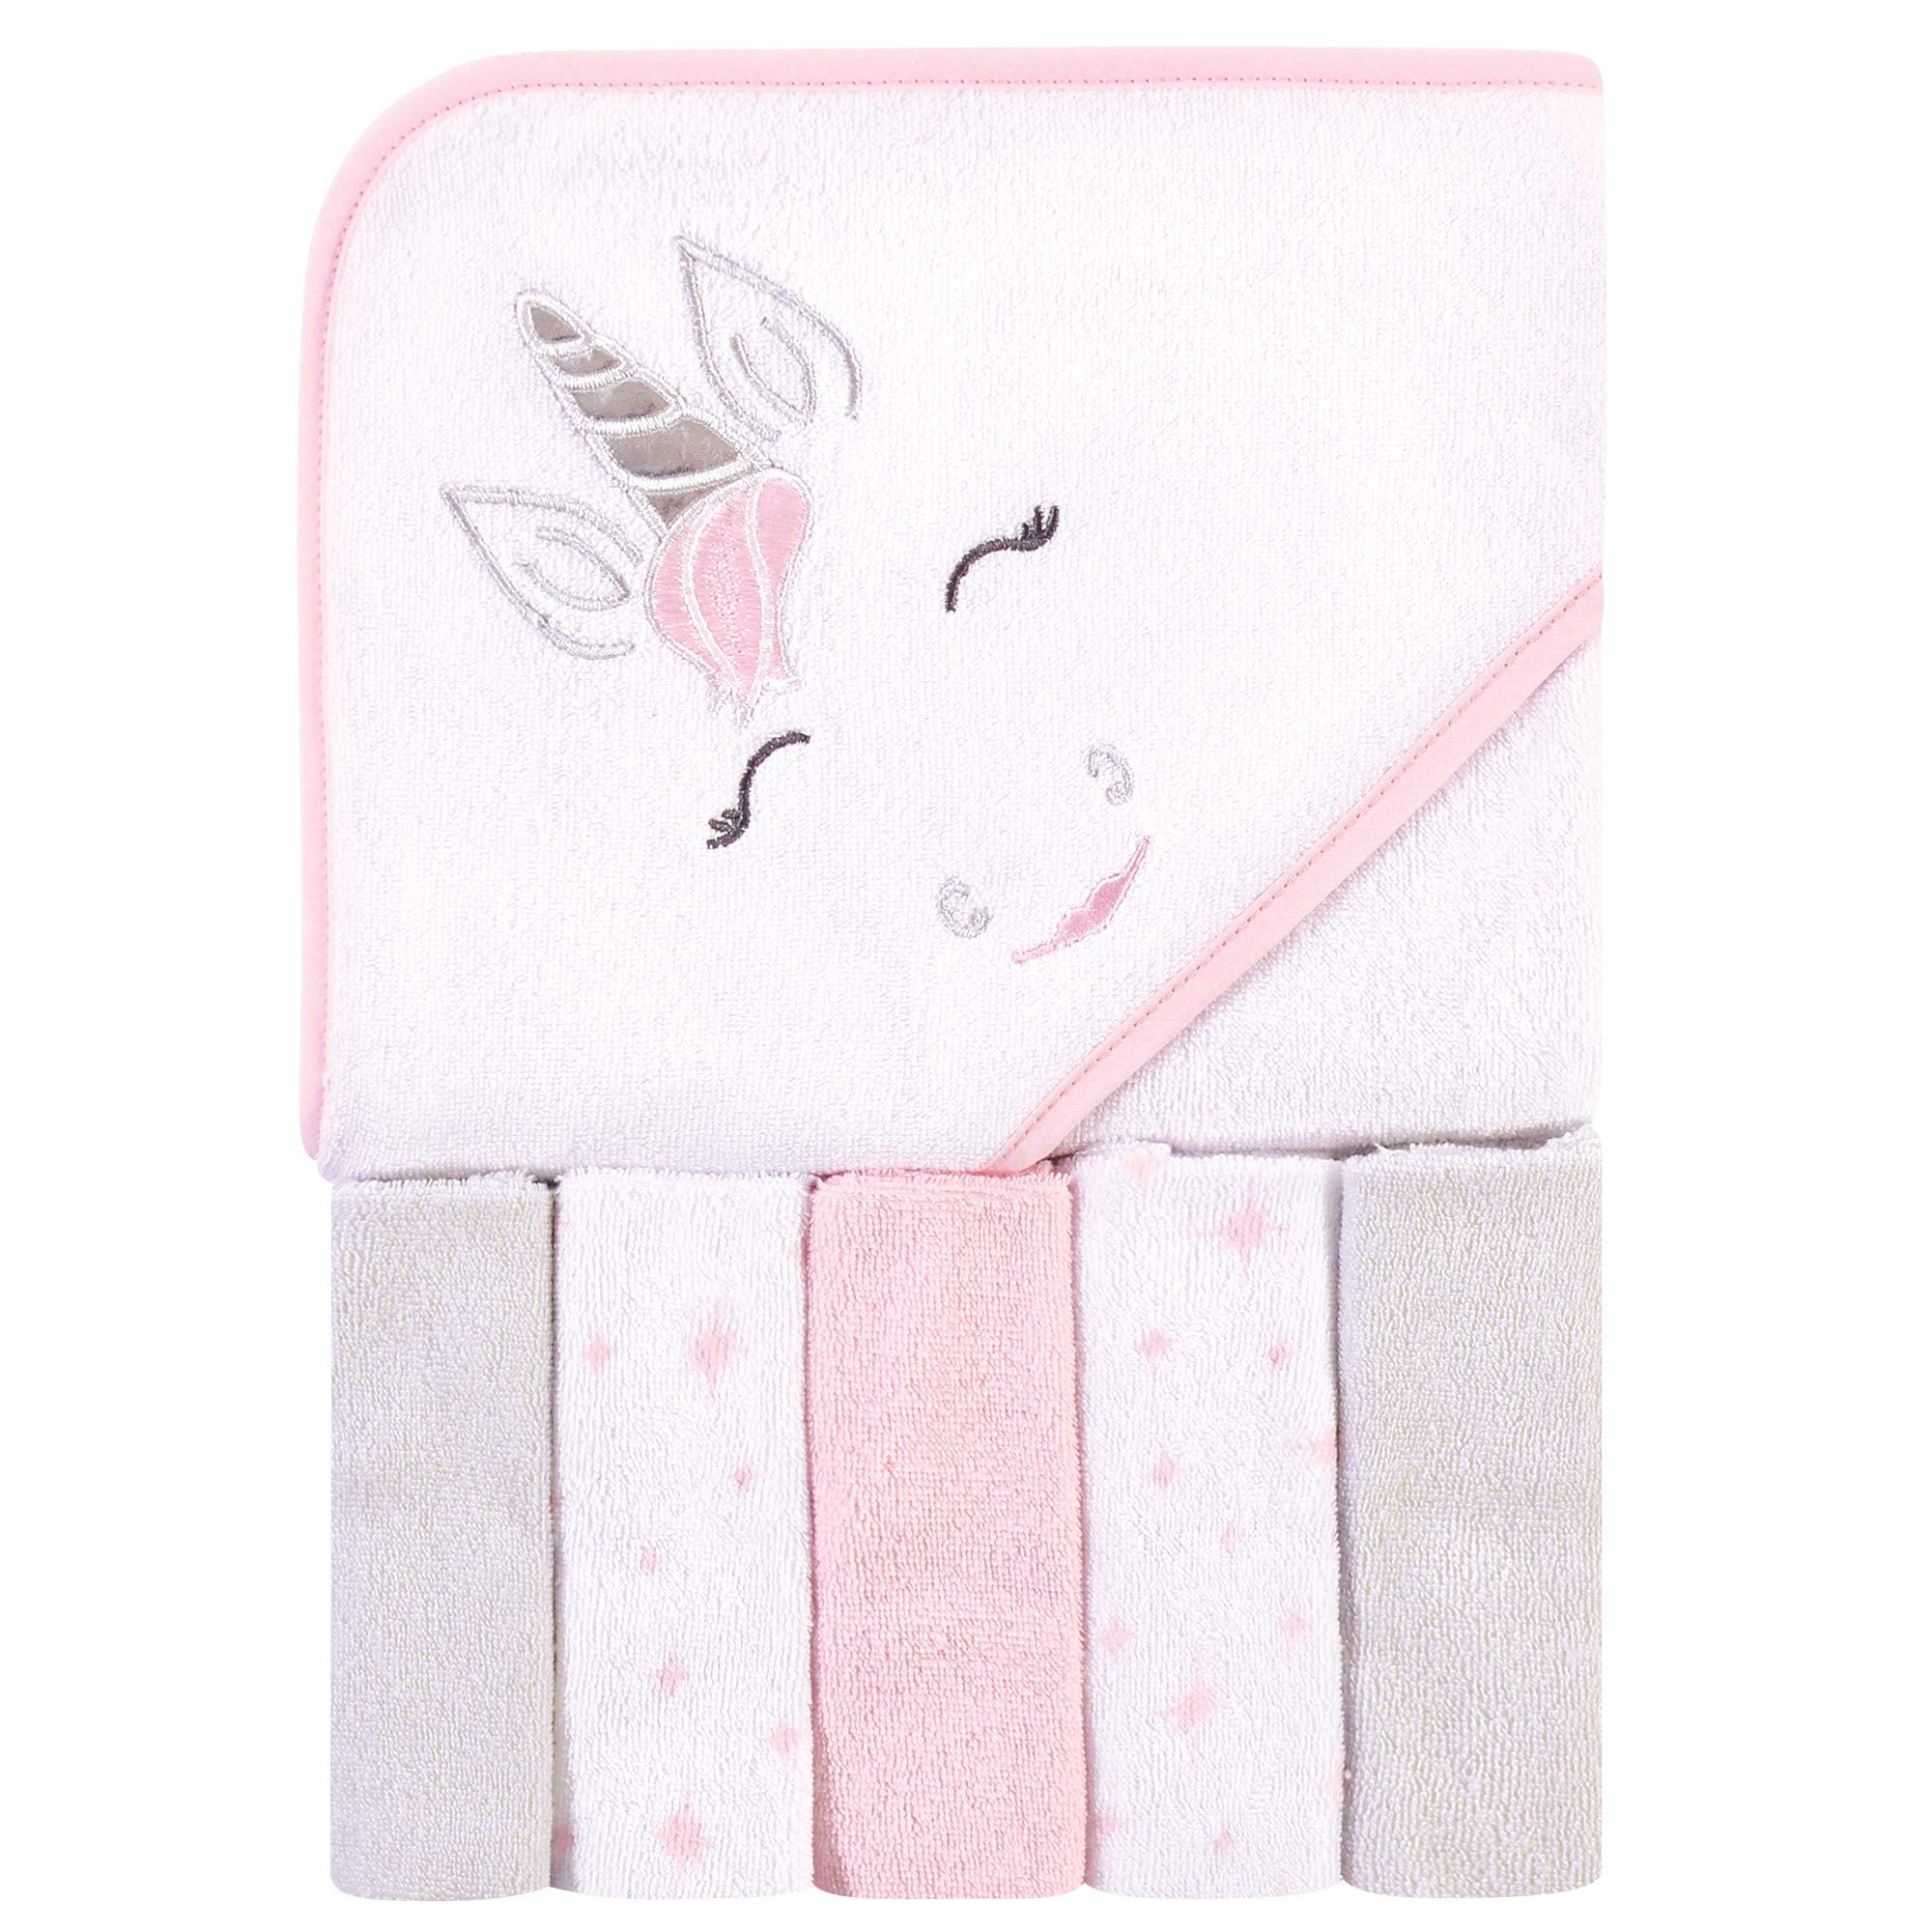 Hudson Baby Unisex Baby Hooded Towel and Five Washcloths, Pink Unicorn, One Size